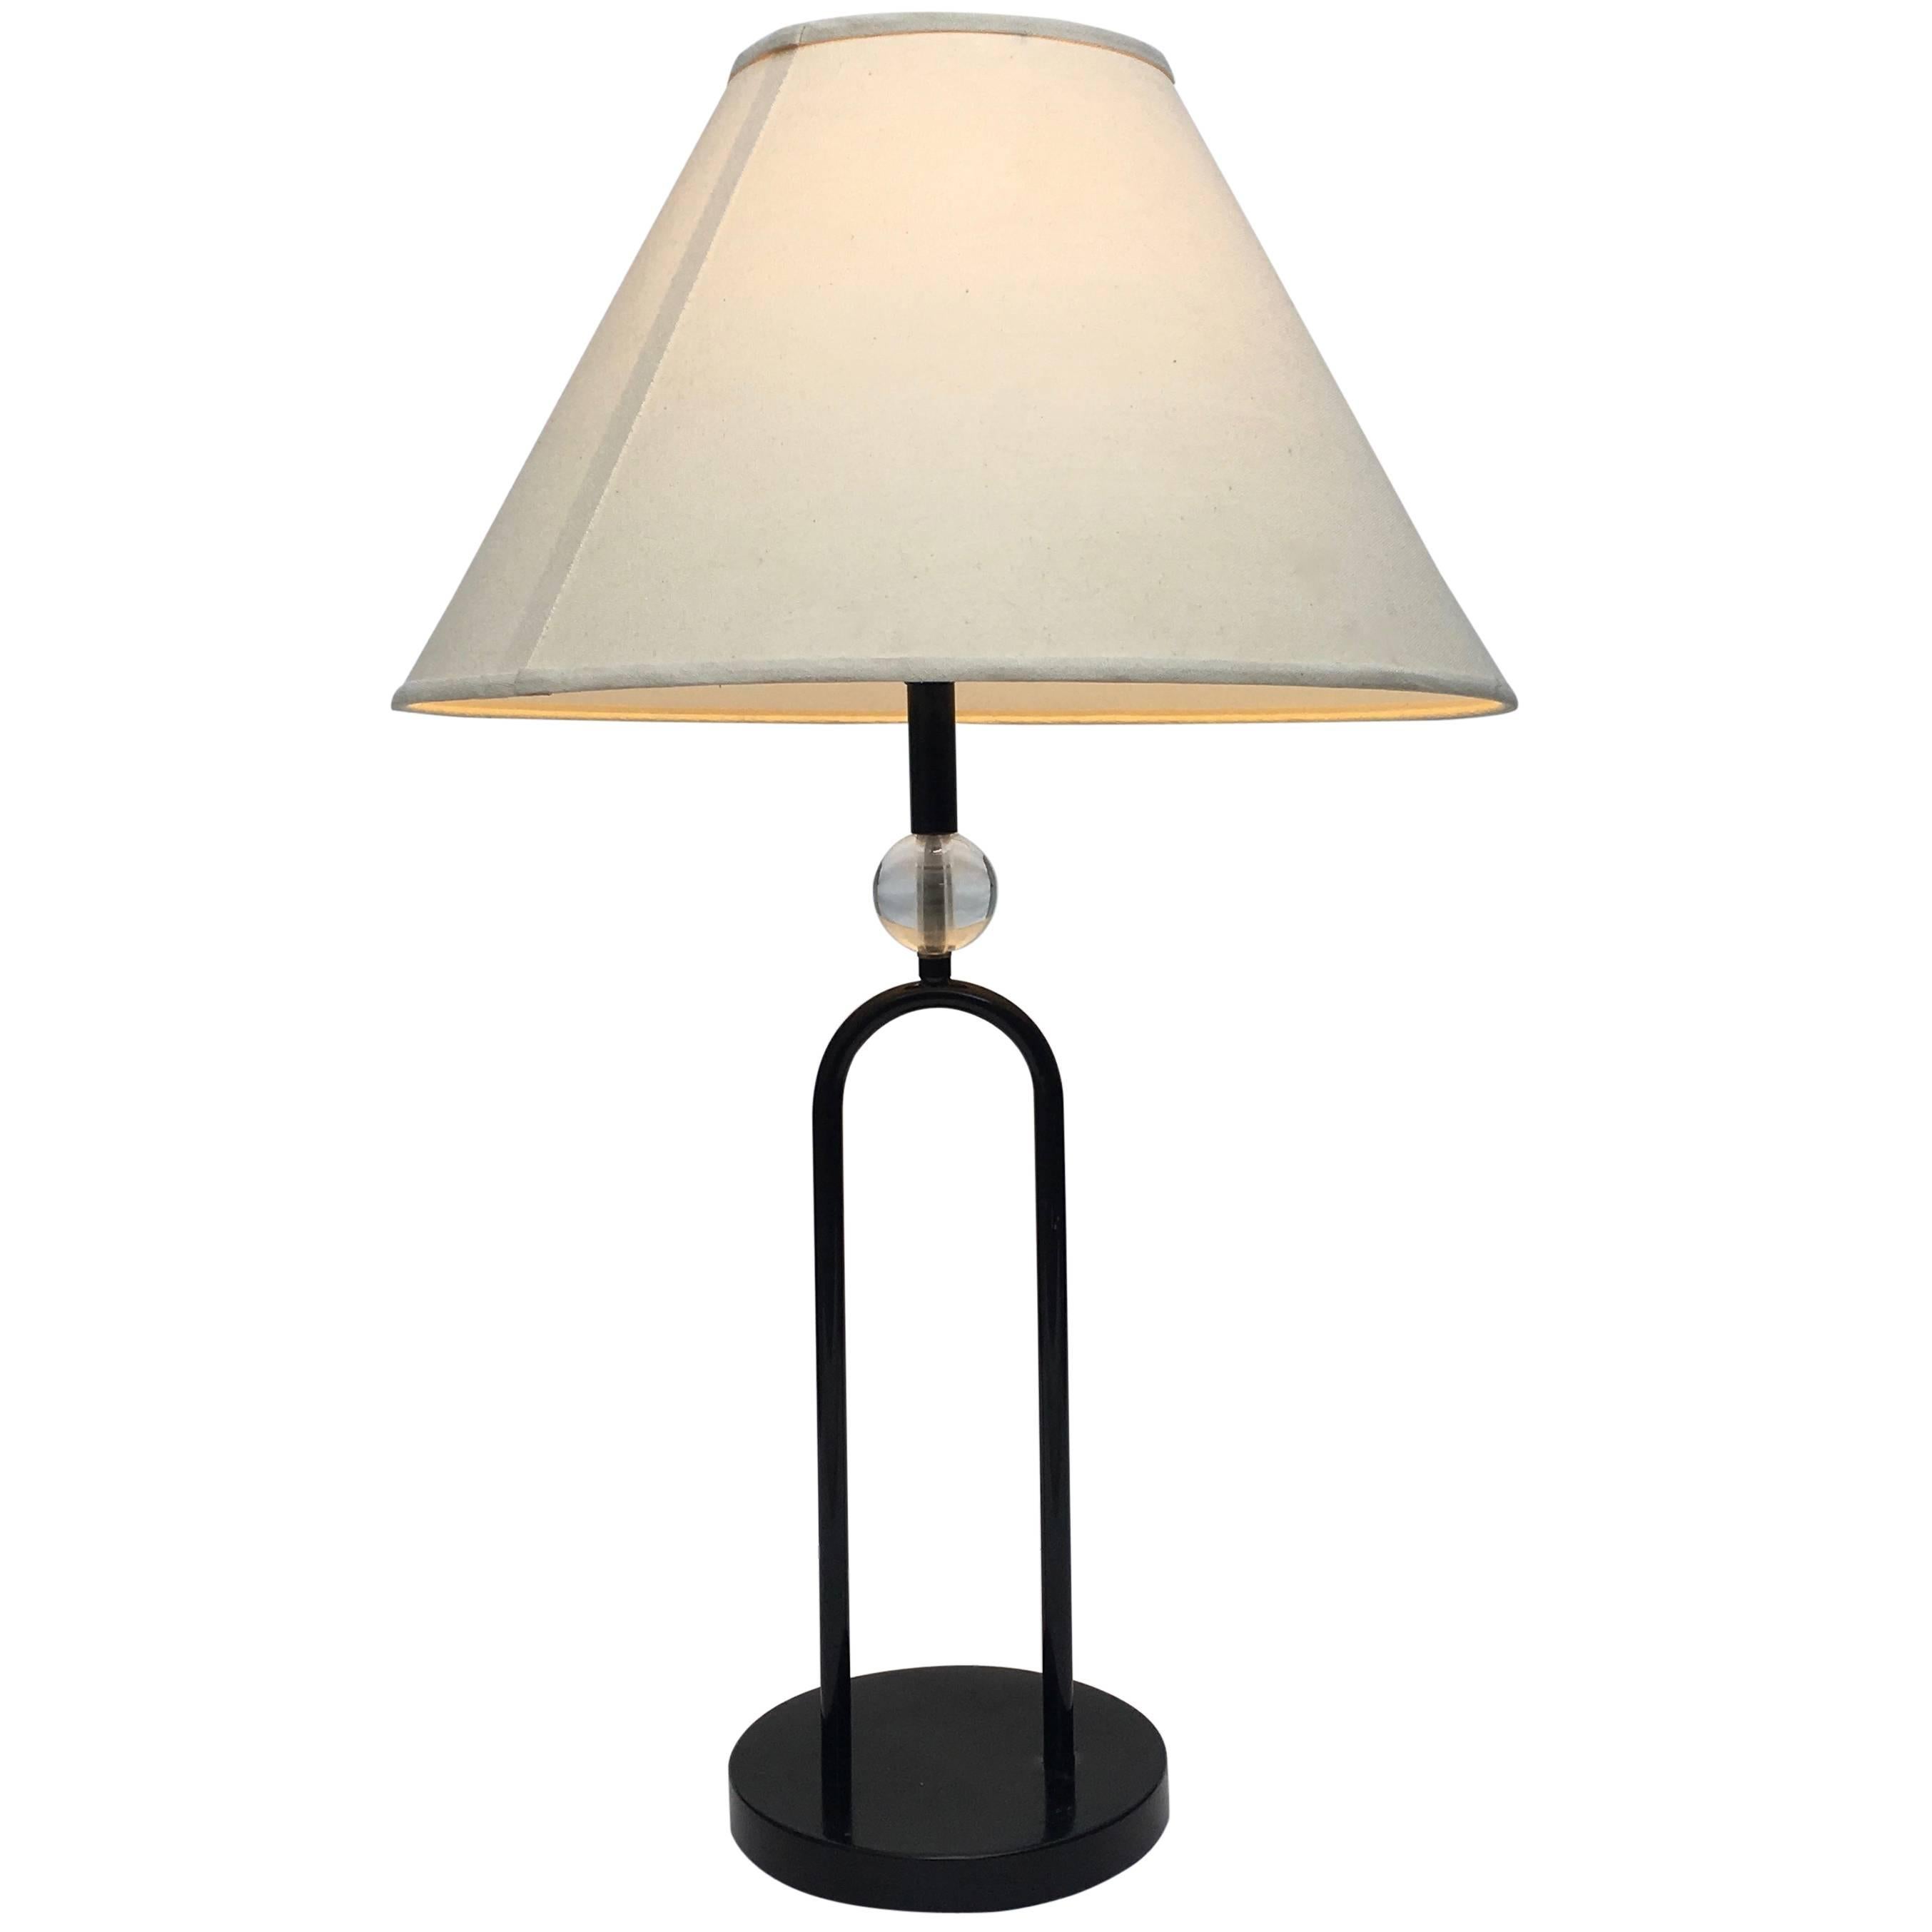 New Age Modernist Table Lamp For Sale